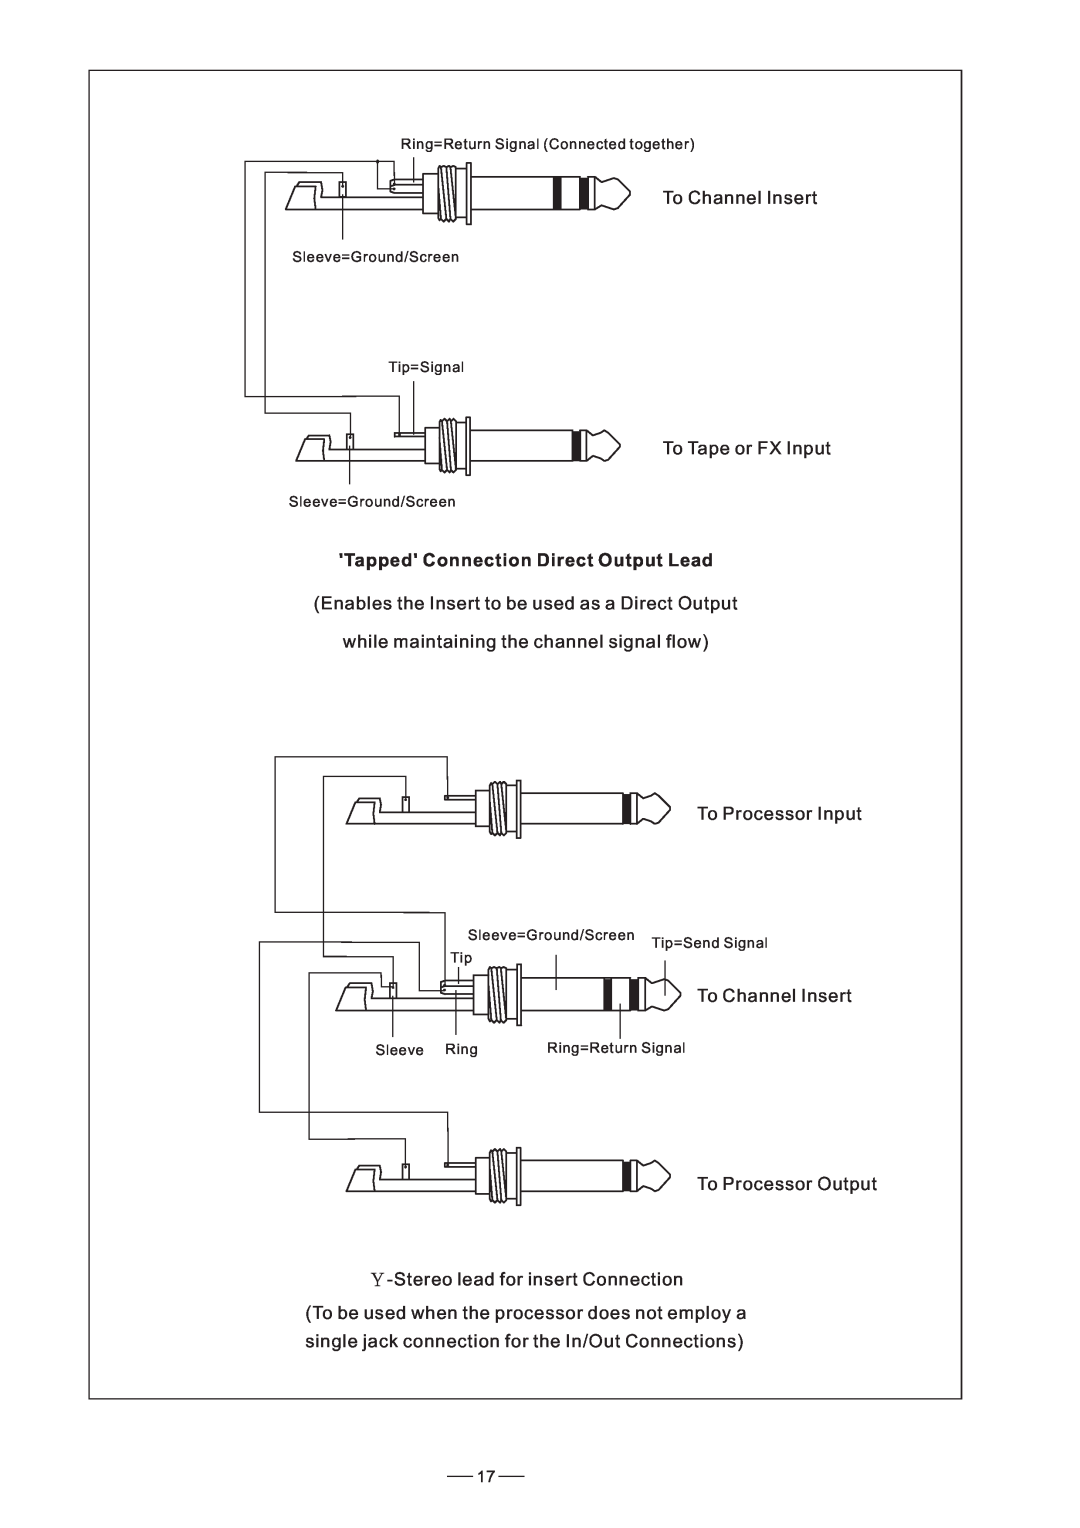 Nilfisk-ALTO AMX-140FX user manual Tapped Connection Direct Output Lead 